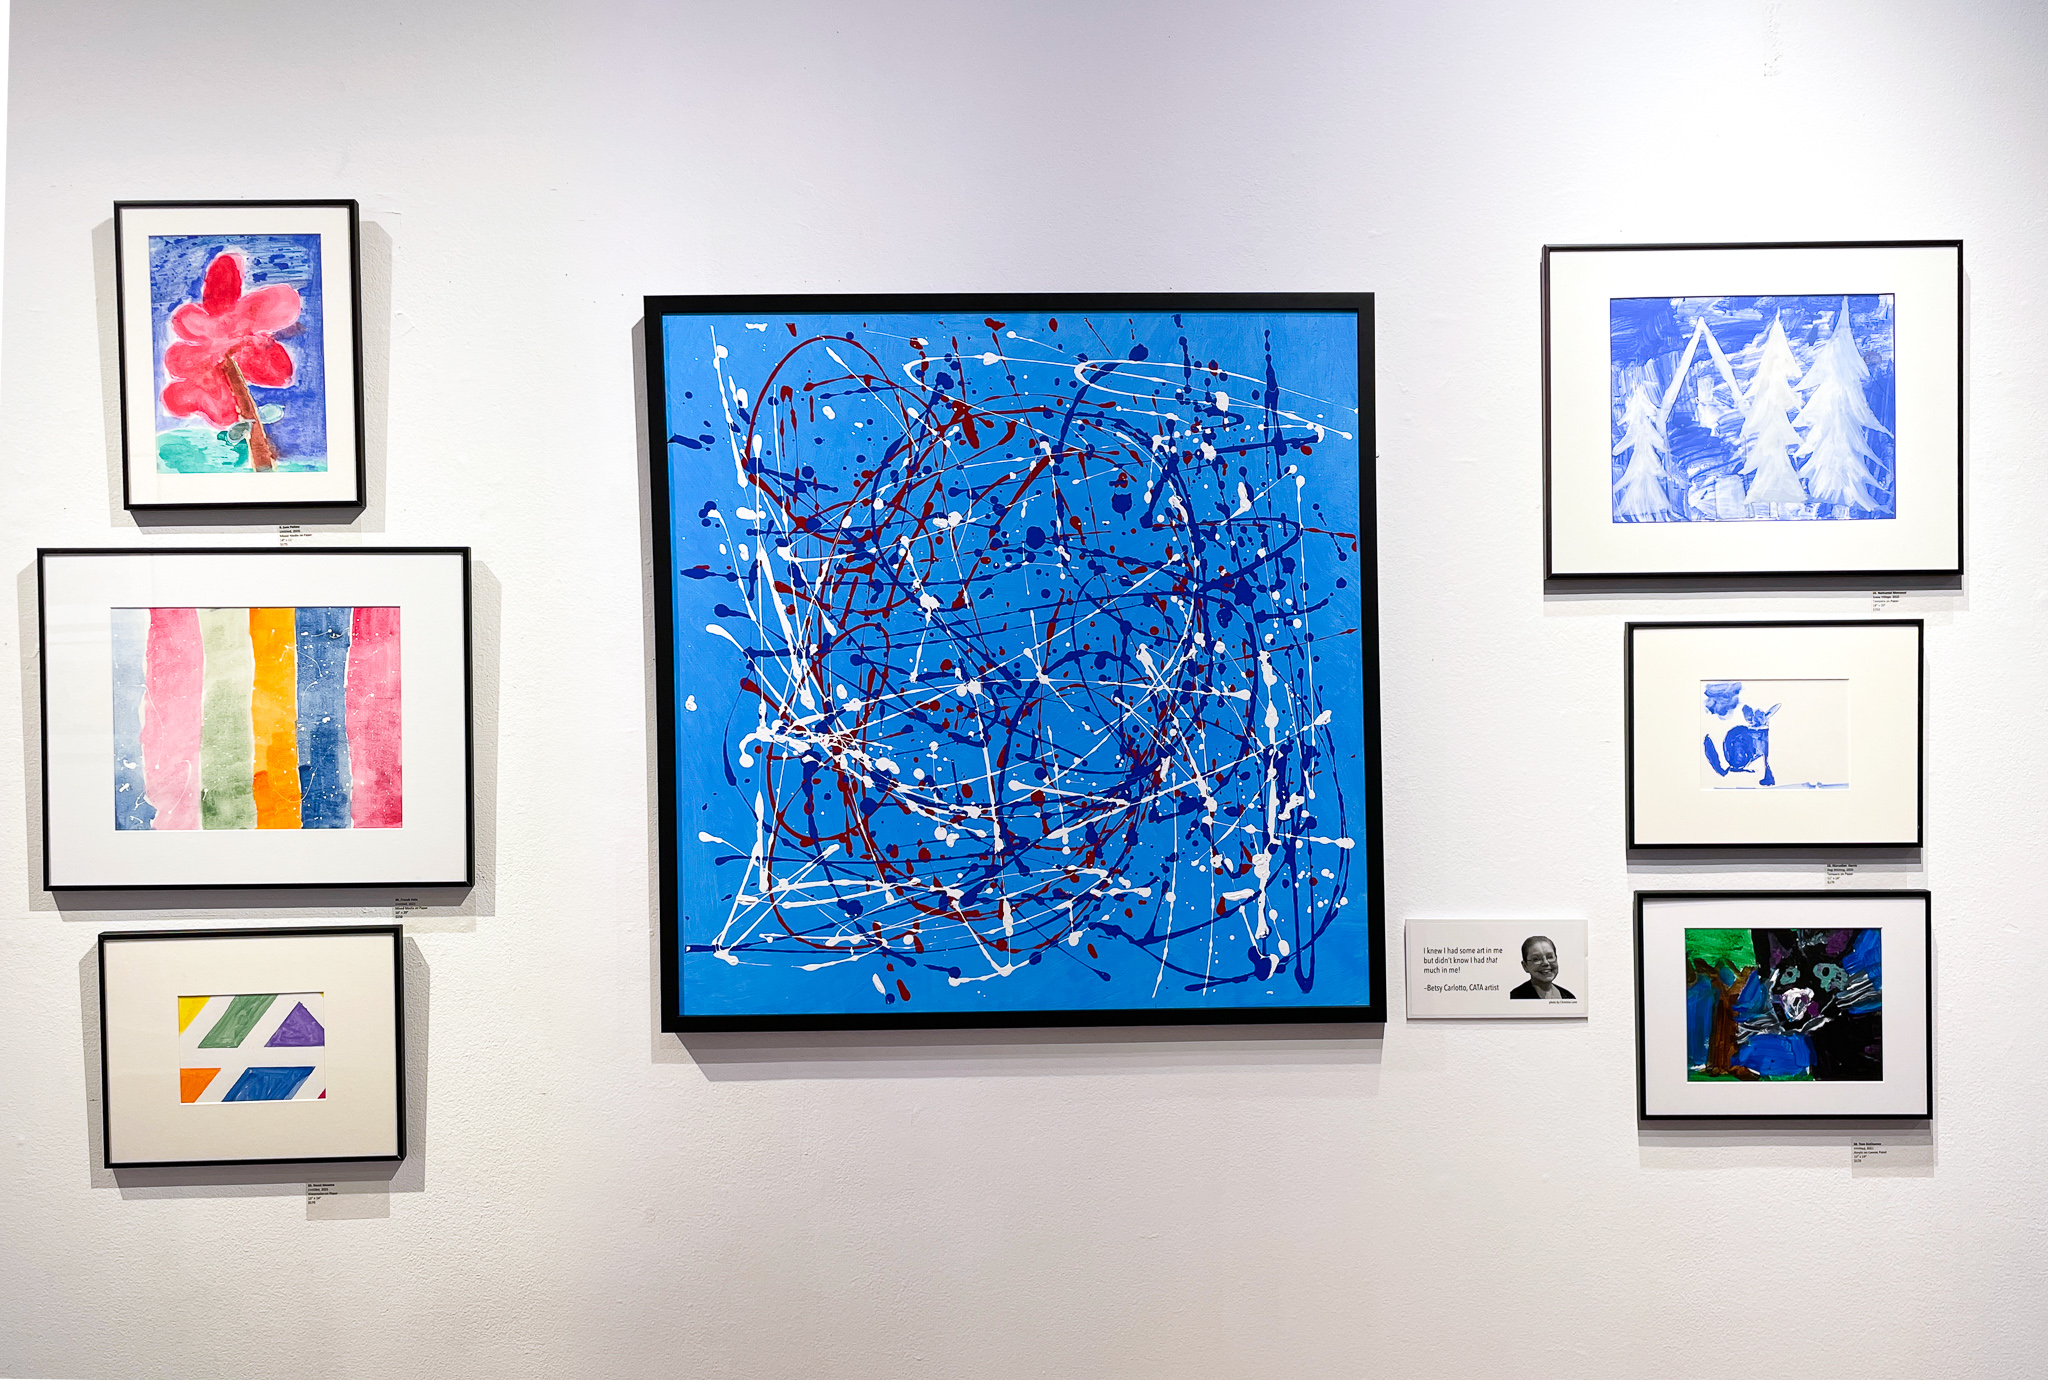 Gallery wall with an assortment of small abstract paintings and one large blue painting in the center